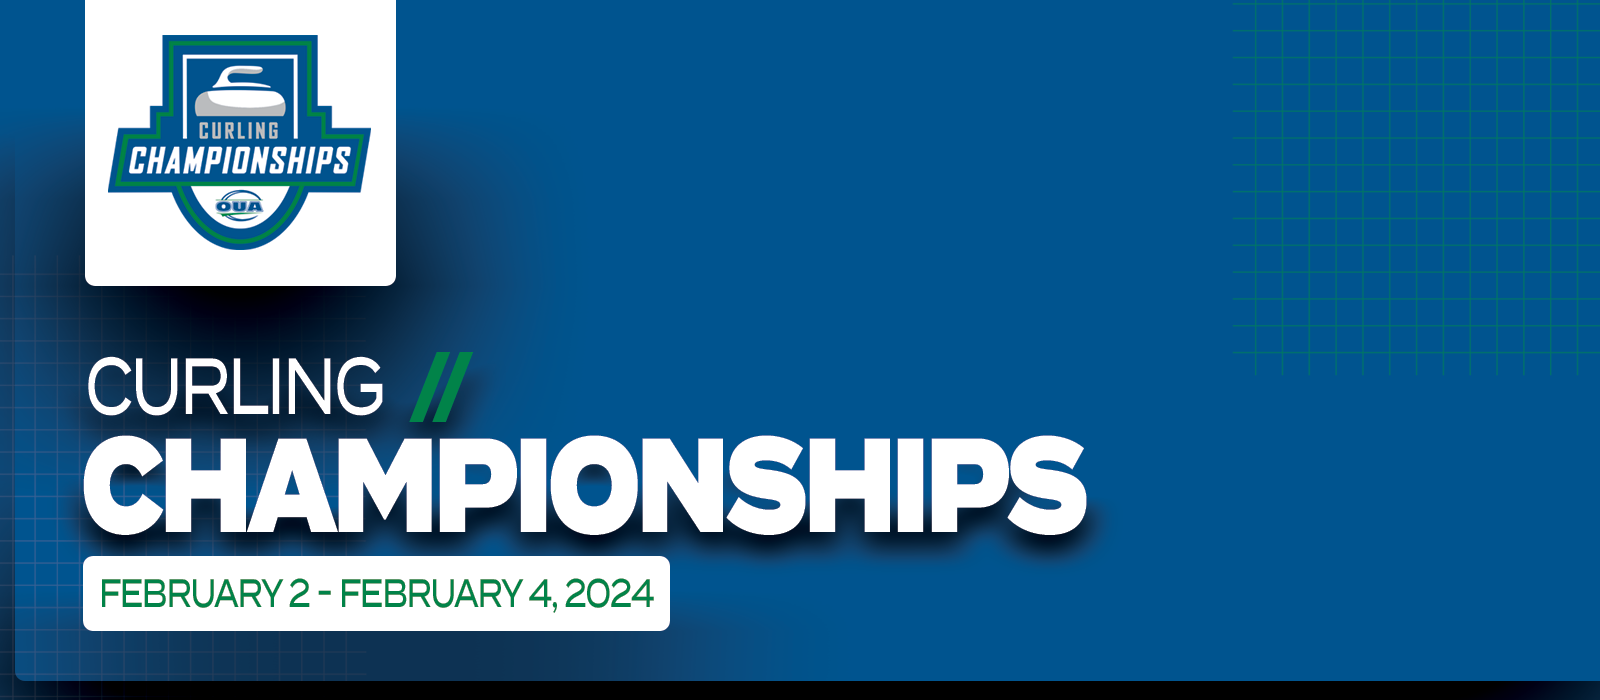 Predominantly blue graphic with large white text on the left side that reads Curling Championships, February 2 – February 4, 2024’ beneath the OUA Curling Championships logo